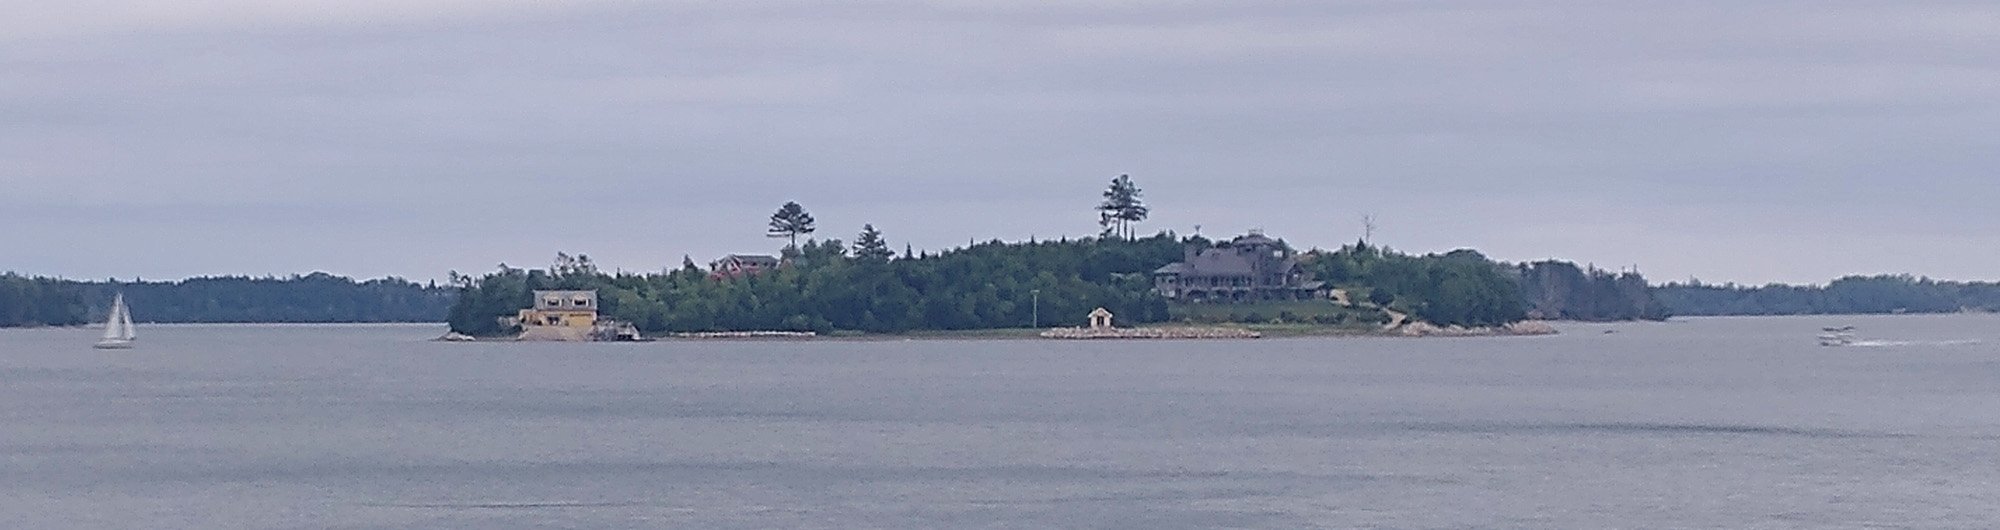 Some James Bond villain enjoying his own private island mansion there.